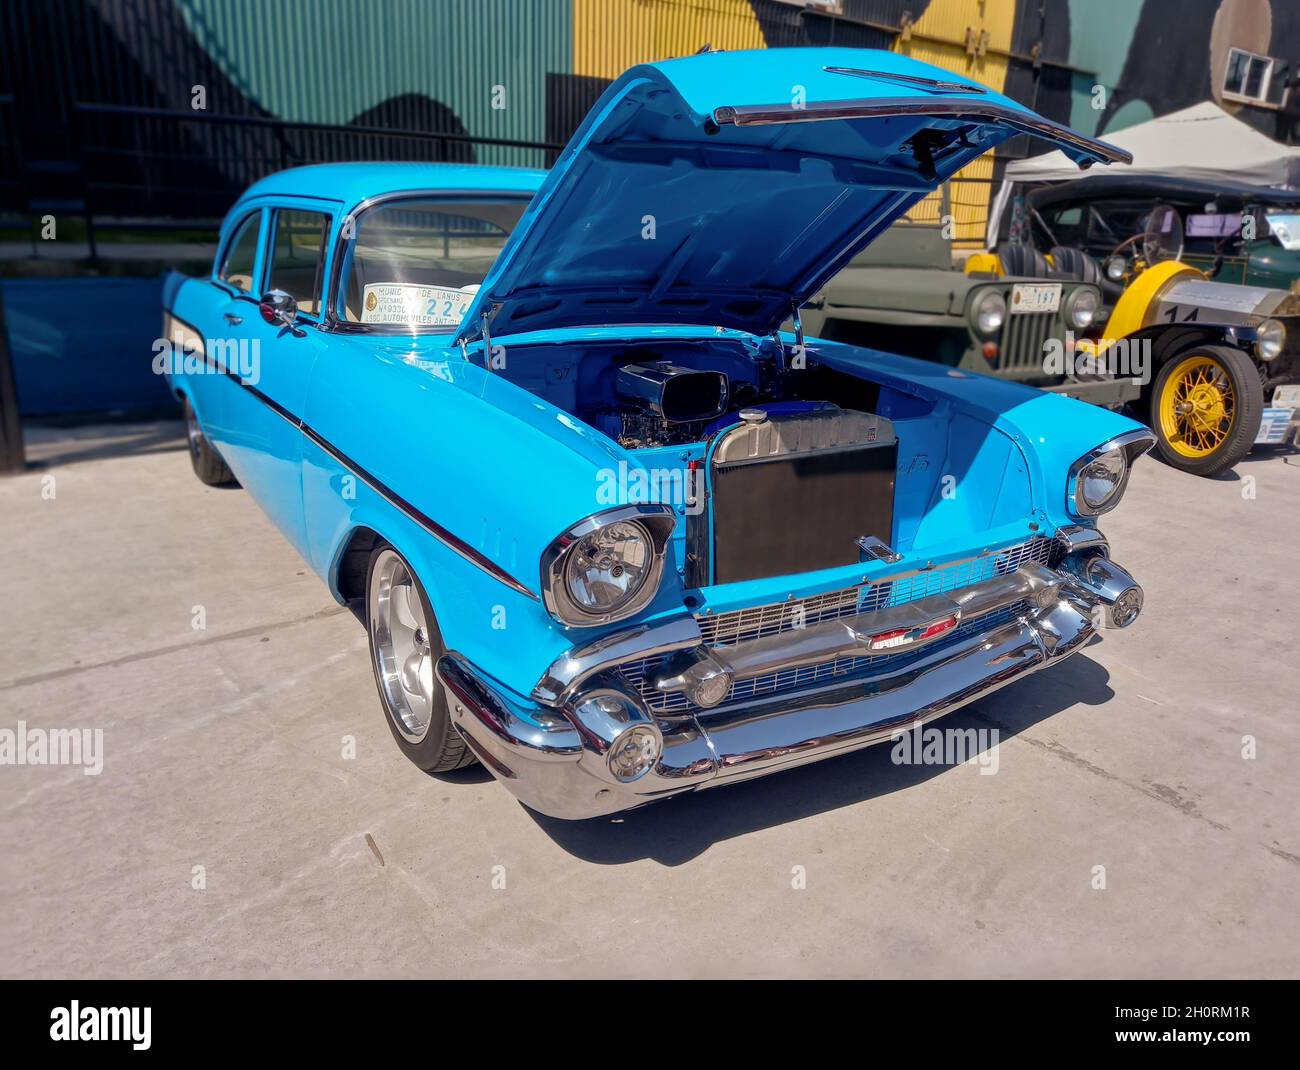 AVELLANEDA - BUENOS AIRES, ARGENTINA - Sep 27, 2021: light blue Chevrolet Bel Air 1957 two door sedan. Iconic classic car. Open hood showing engine. E Stock Photo